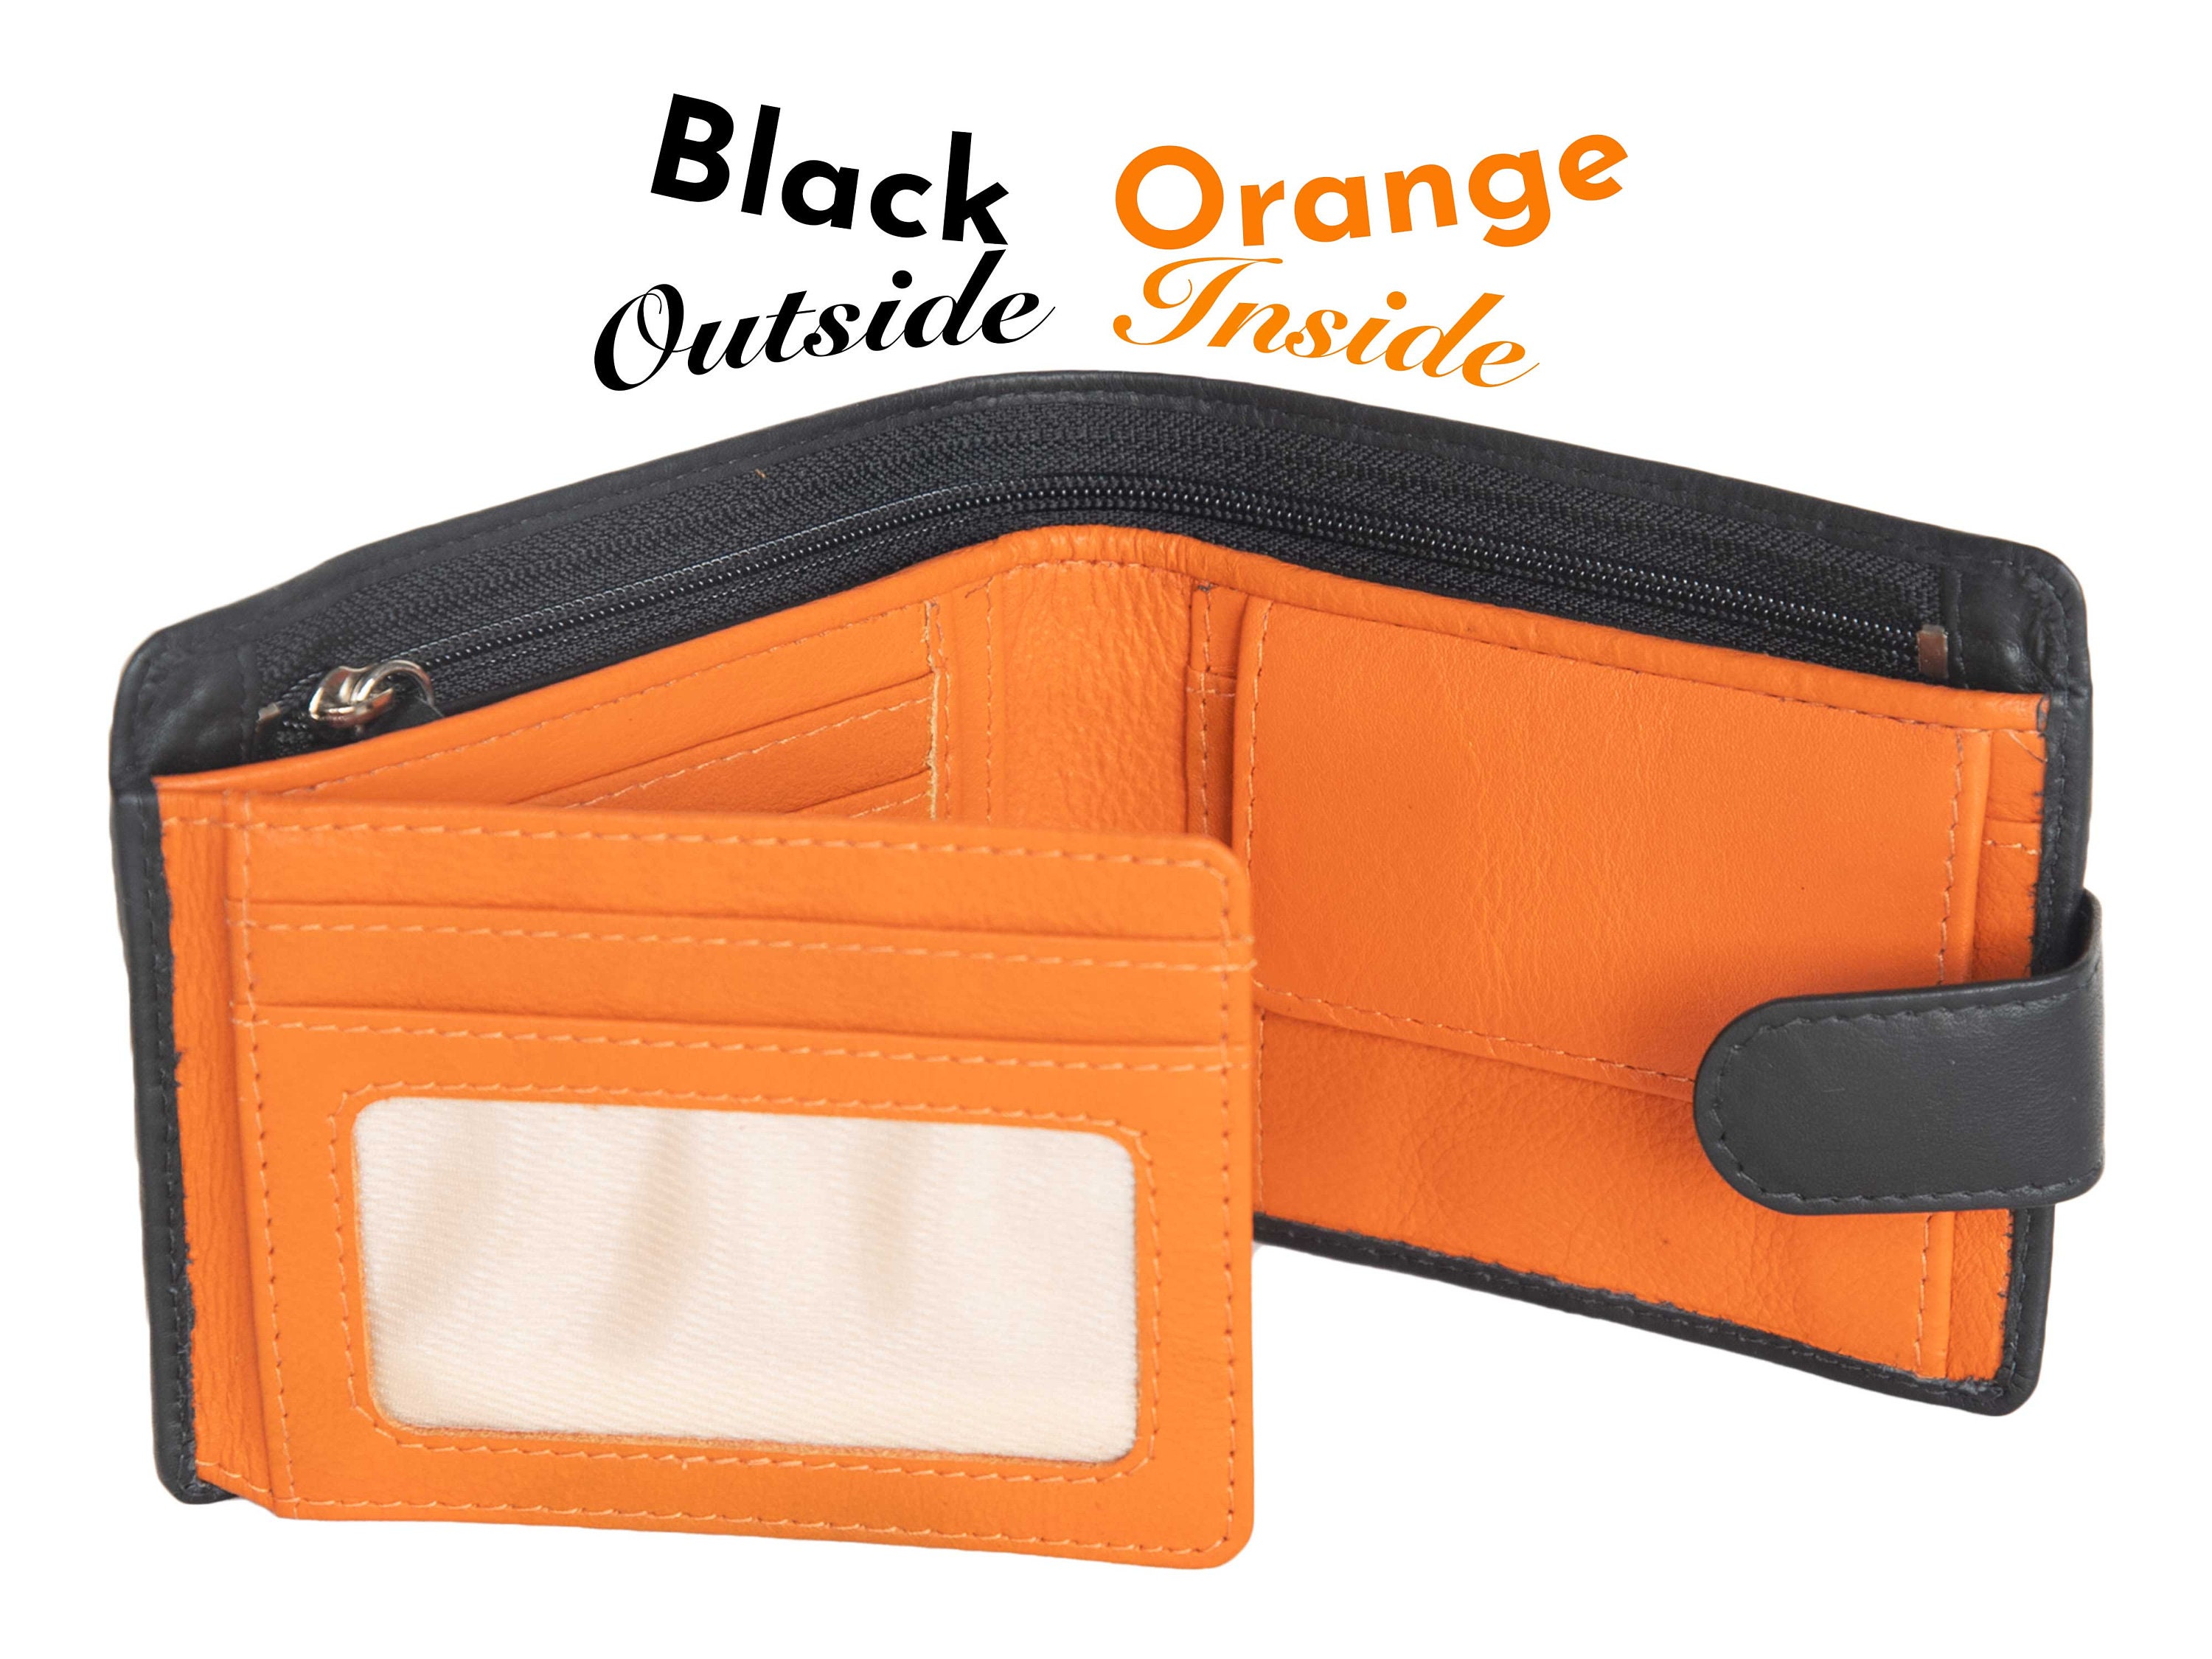 Leather orange coin purse id slot snap pocket w/ 6 credit card slots